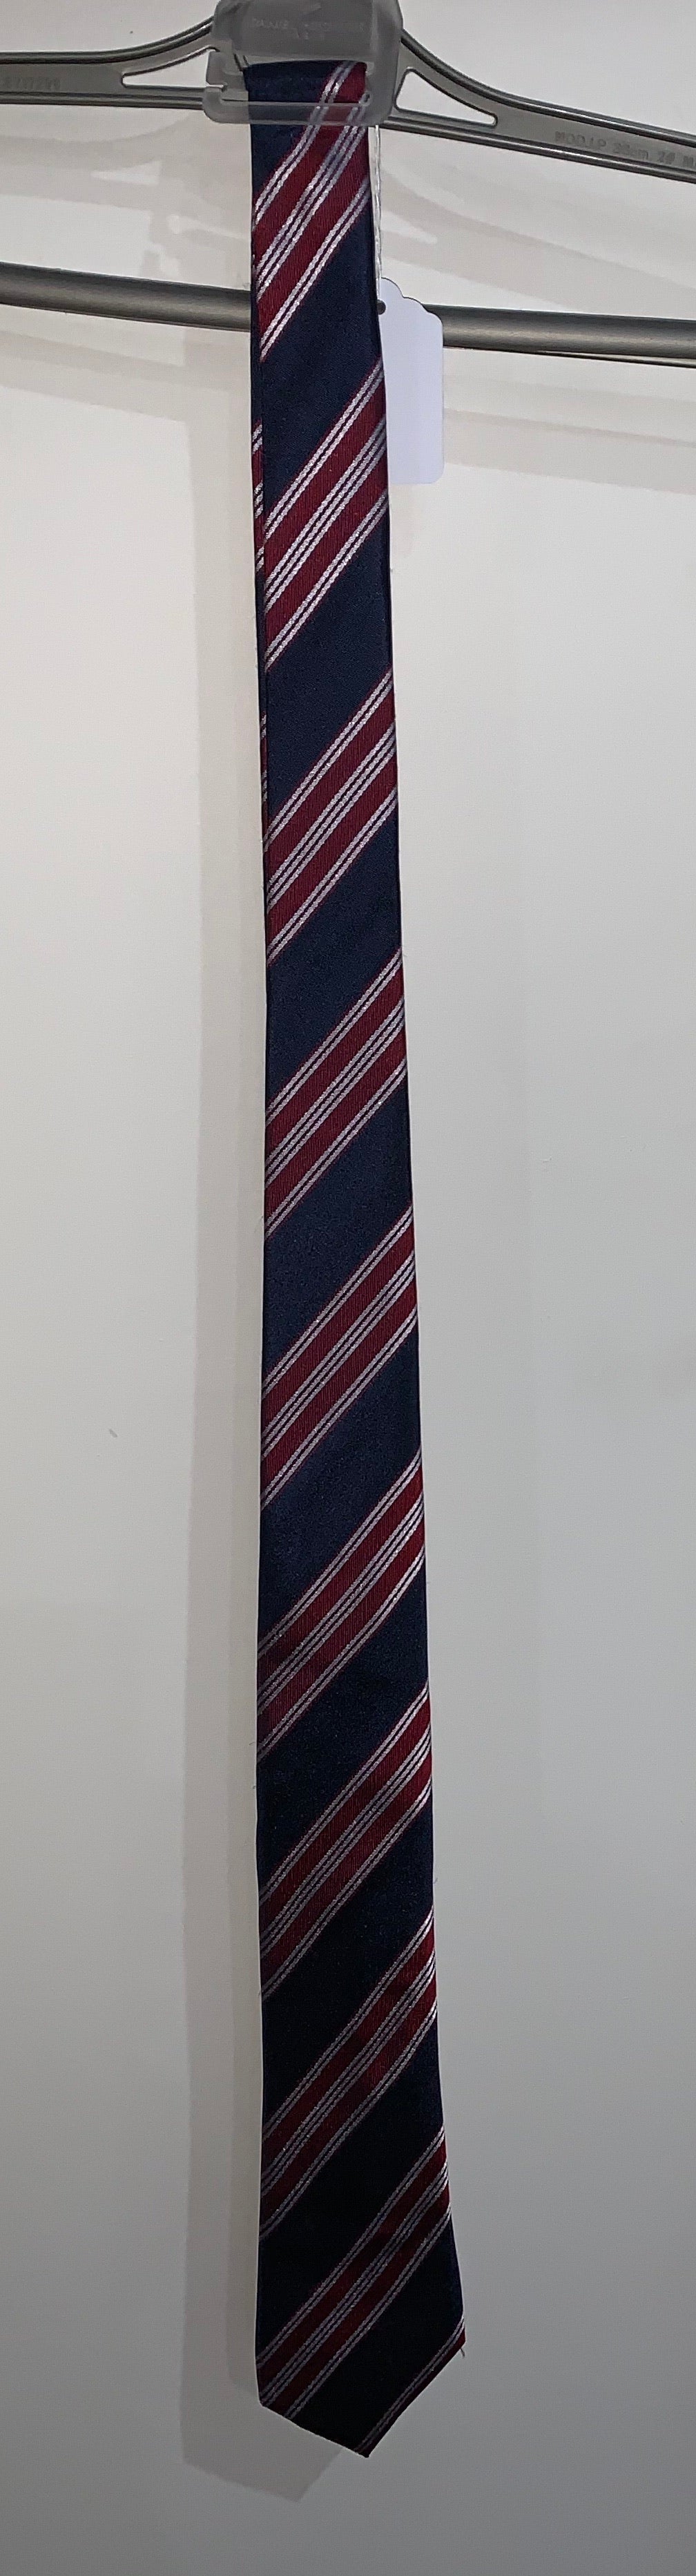 TIE SILK 20, NAVY WITH MAROON AND SILVER STRIPES 100% SILK